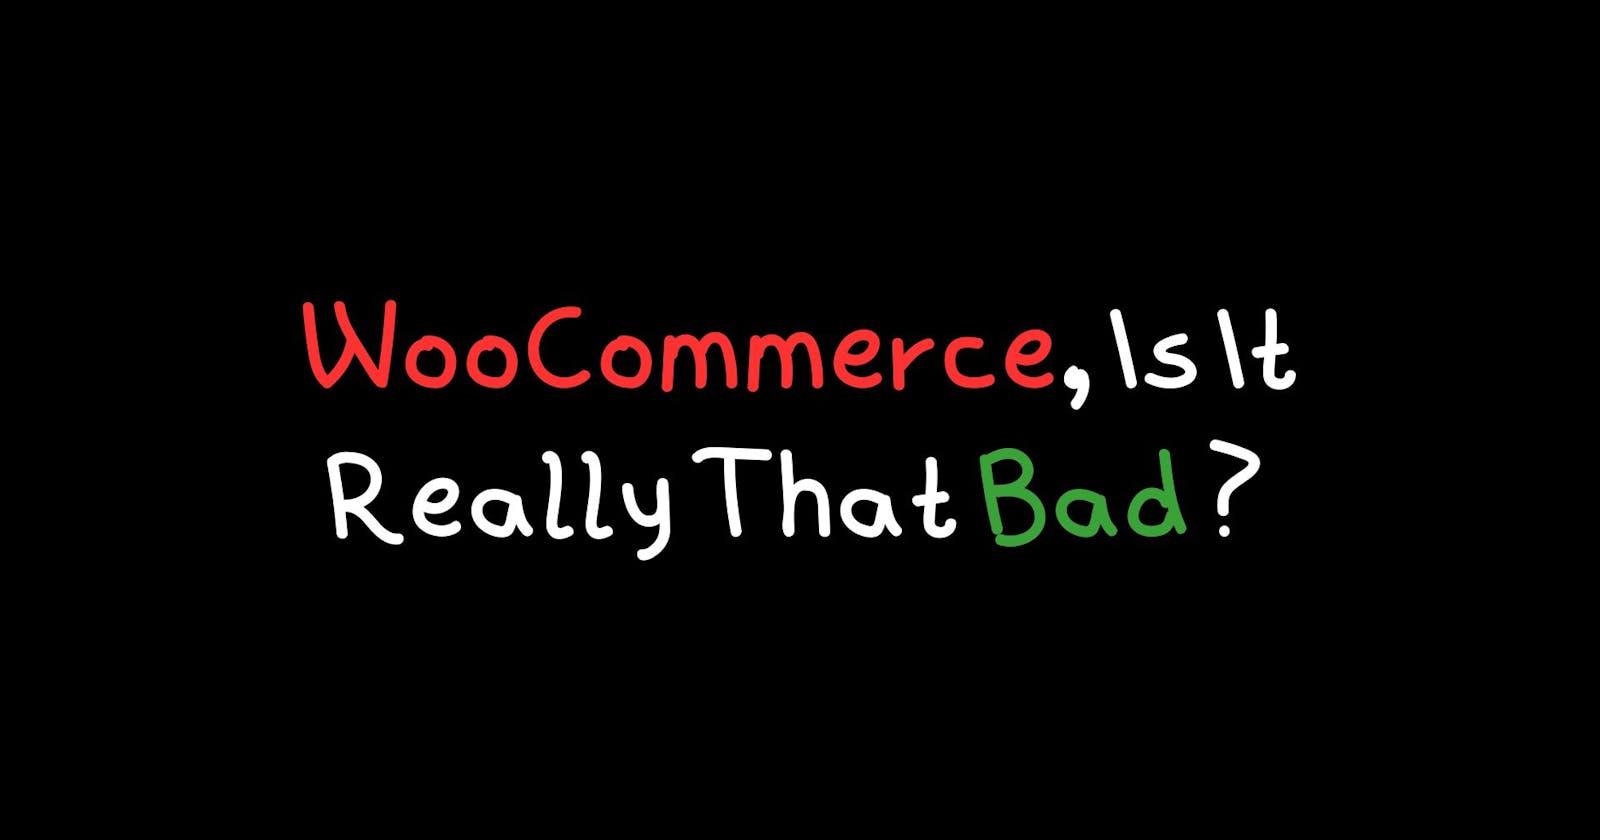 WooCommerce, Is It Really That Bad ? (67% Market Share)